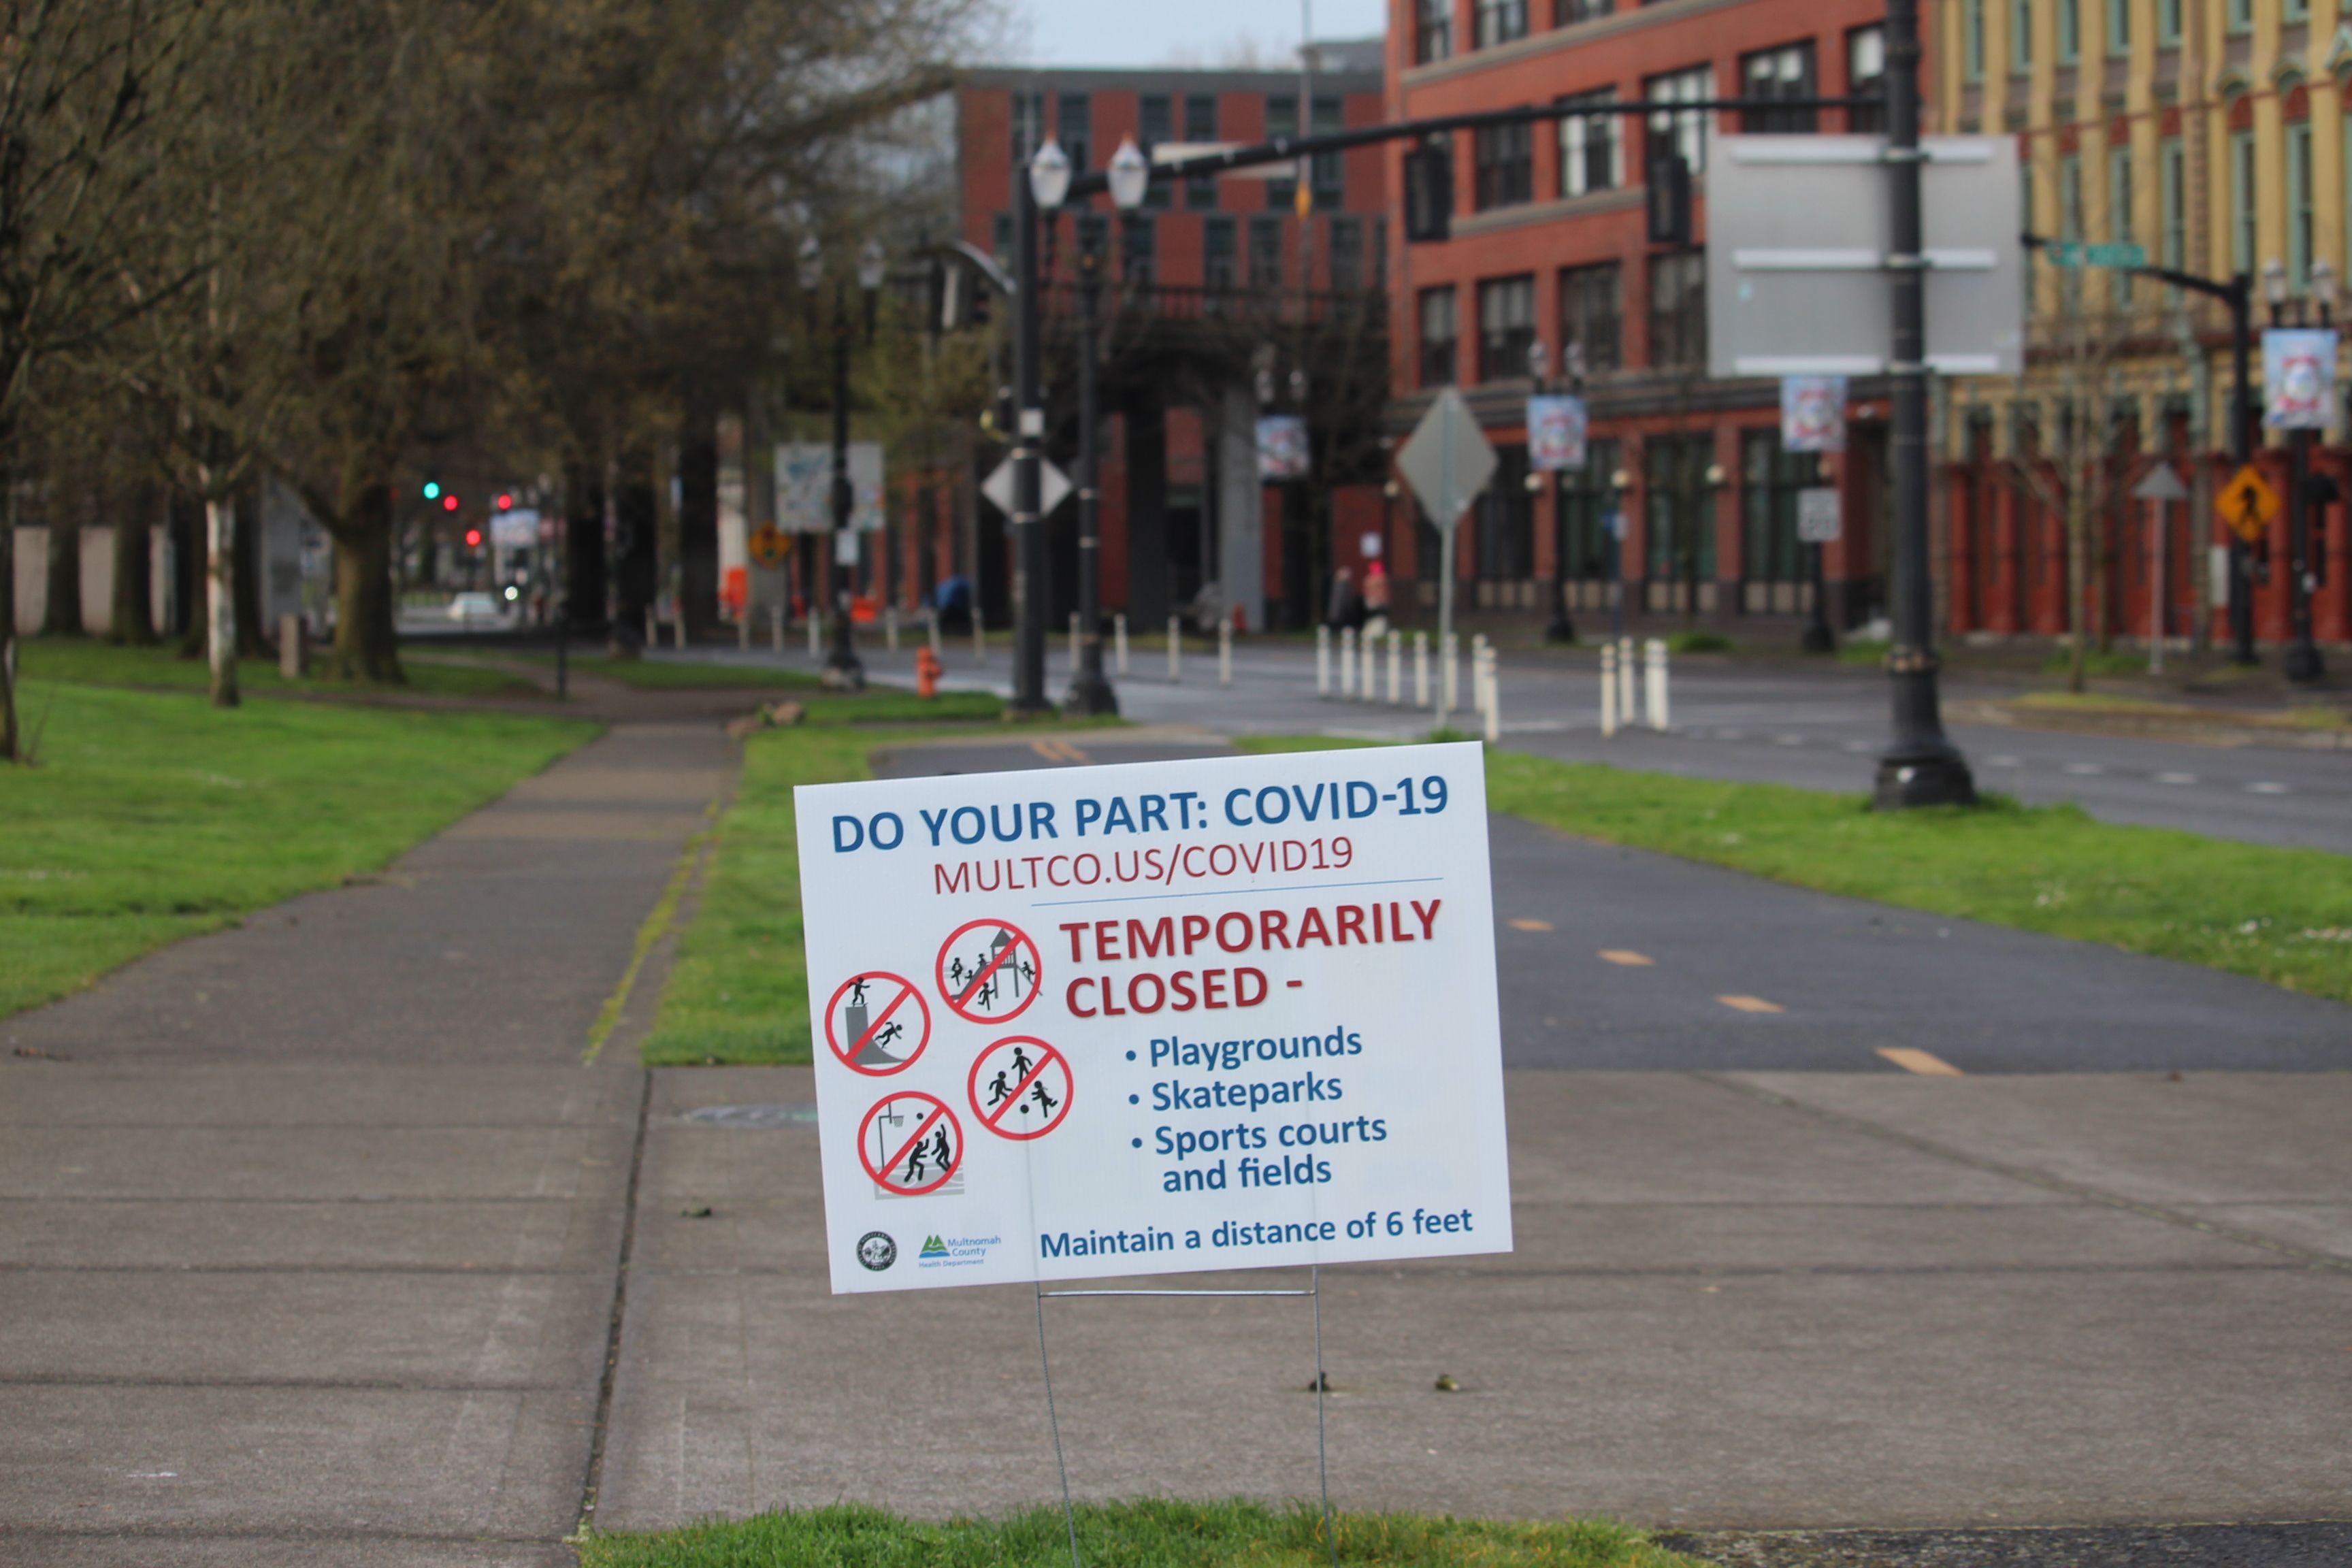 April 5, 2020 – A sign posted by Multnomah County informs citizens that parks and playgrounds are closed and reminds individuals to maintain a distance of six feet between each other. Image by Sarah Fahmy. United States, 2020.